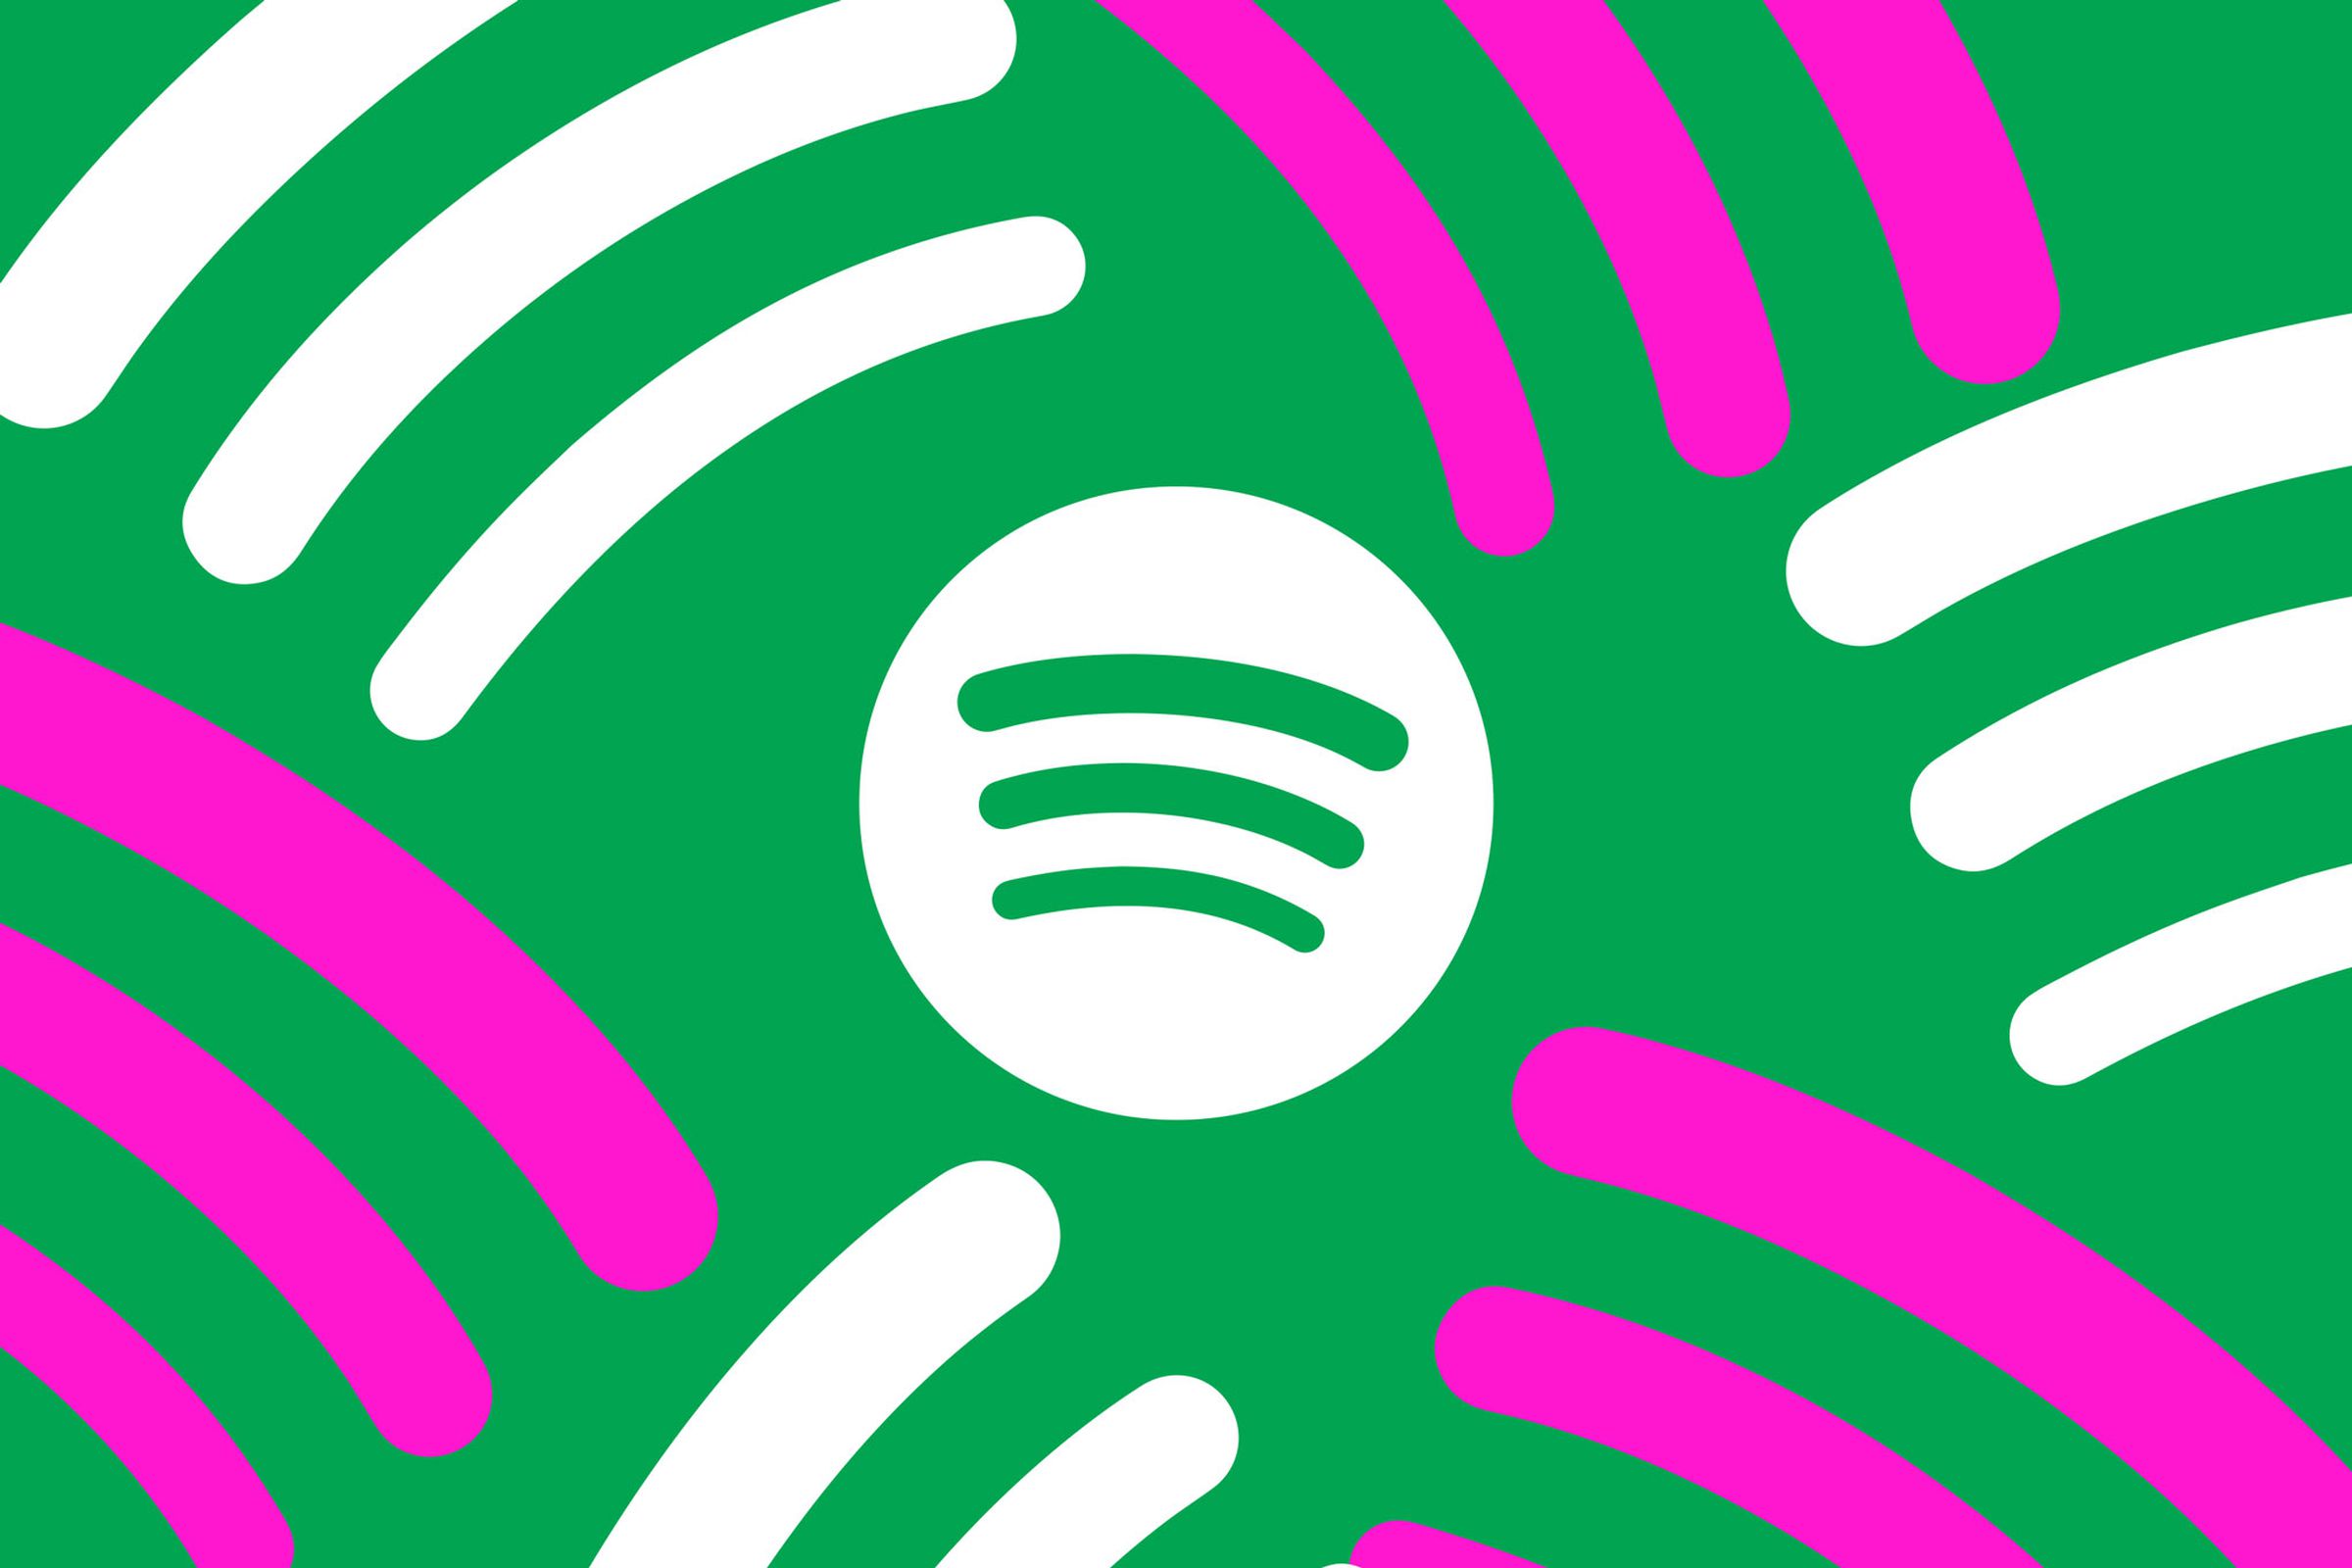 Spotify is laying off six percent of its global workforce, CEO announces